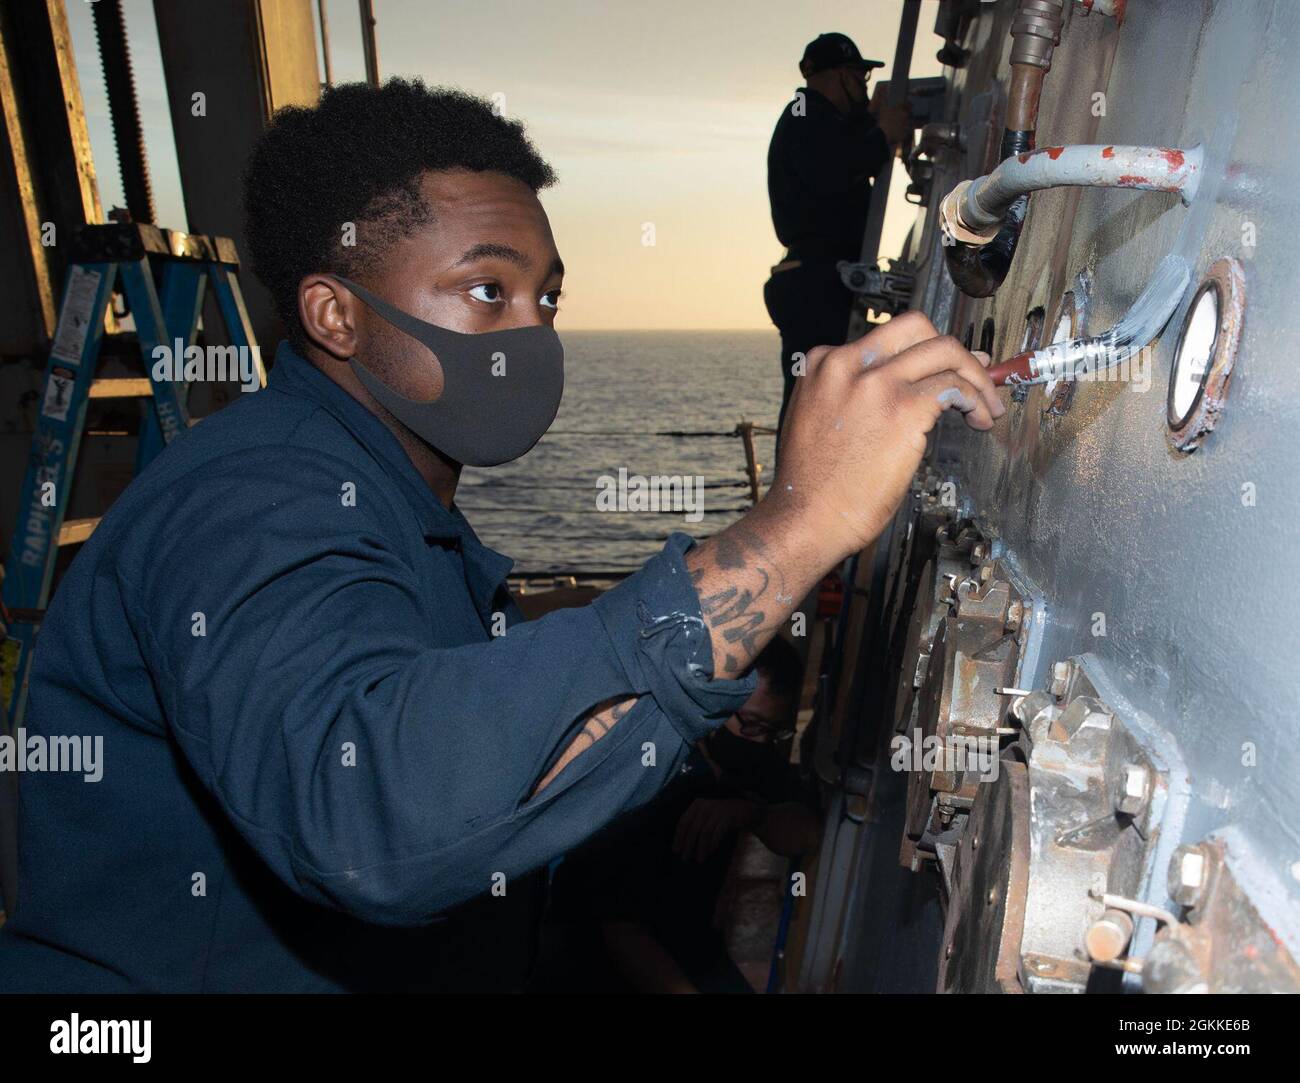 210515-N-IP743-1000 PHILIPPINE SEA (May 15, 2021) Gas Turbine Systems Technician (Mechanical) 3rd Class Elisha Miller, from Tampa, Fla., paints a bulkhead as part of regular ship maintenance aboard Arleigh Burke-class guided-missile destroyer USS Milius (DDG 69). Milius is assigned to Commander, Task Force 71/Destroyer Squadron (DESRON) 15, the Navy’s largest forward-deployed DESRON and the U.S. 7th Fleet’s principal surface force. Stock Photo